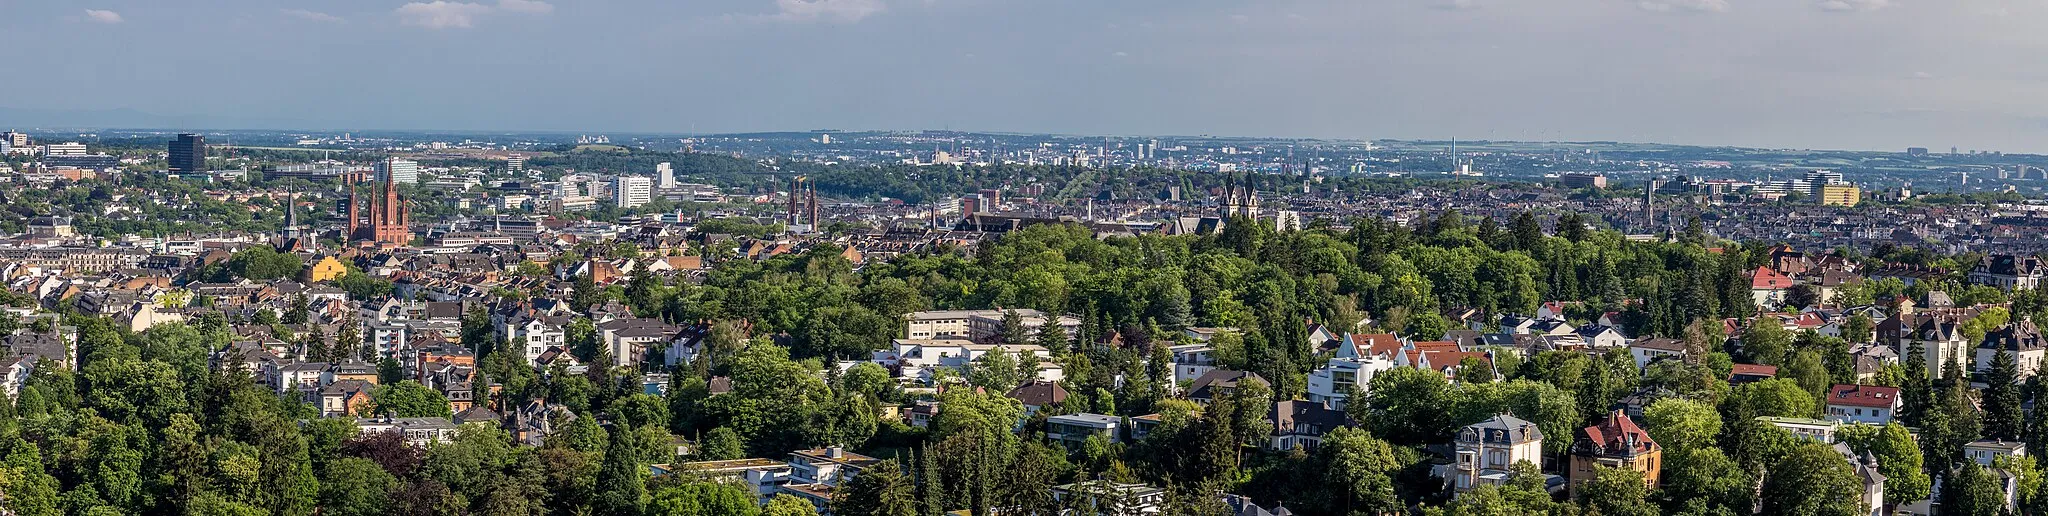 Photo showing: Panorama of Wiesbaden (and Mainz in the background) taken from Wiesbaden Neroberg